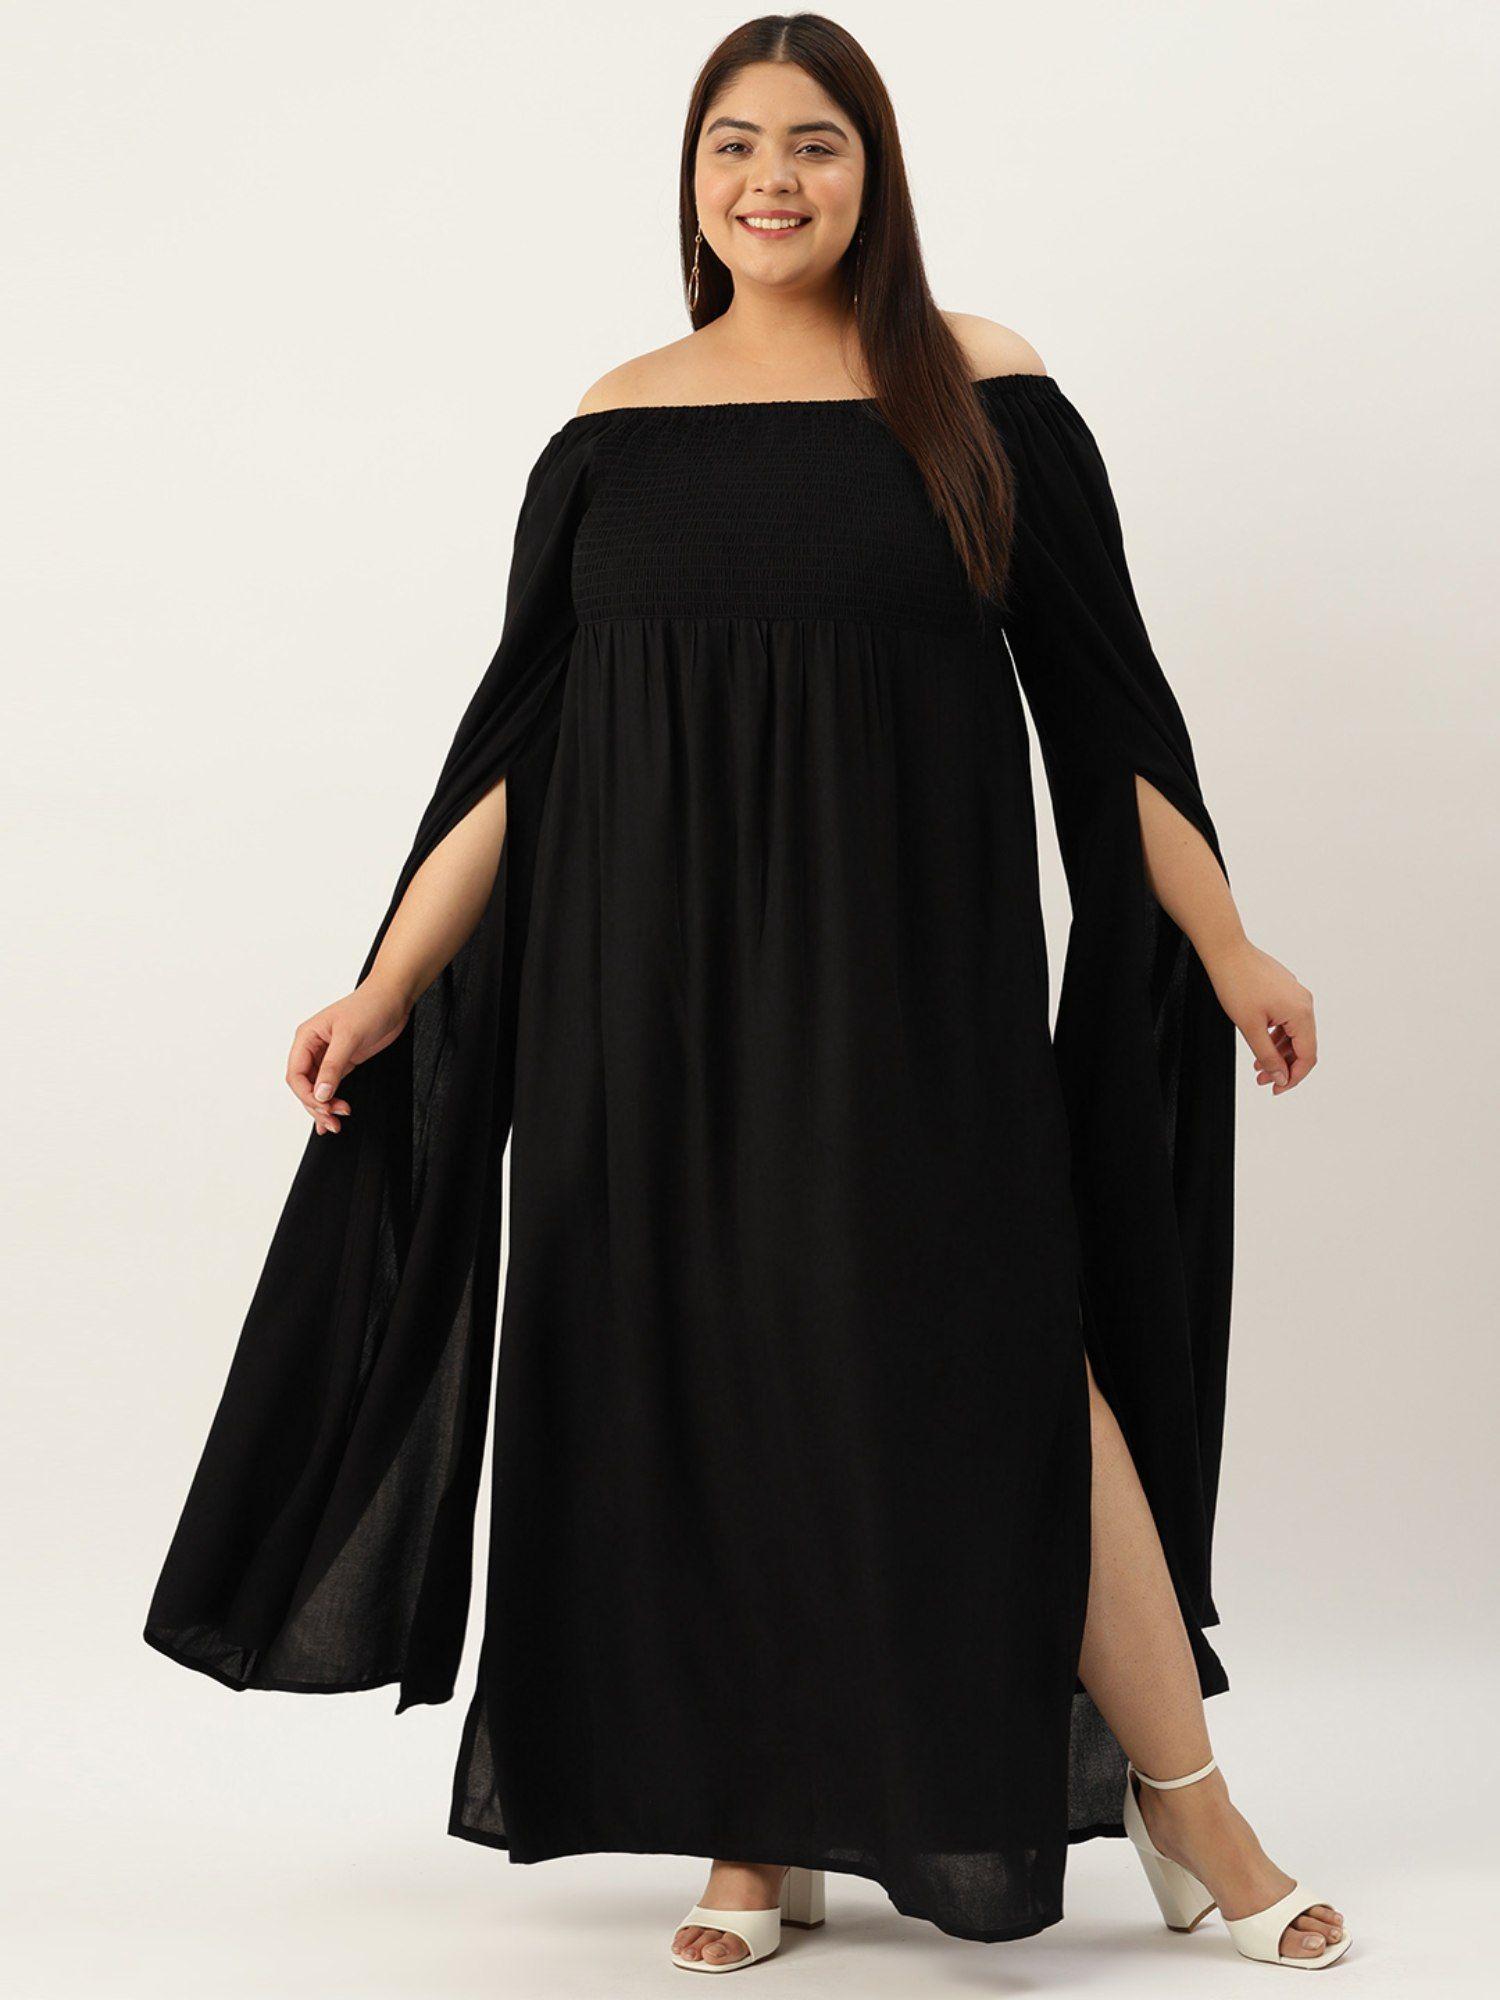 plus-size-women's-black-solid-color-extended-sleeve-maxi-dress